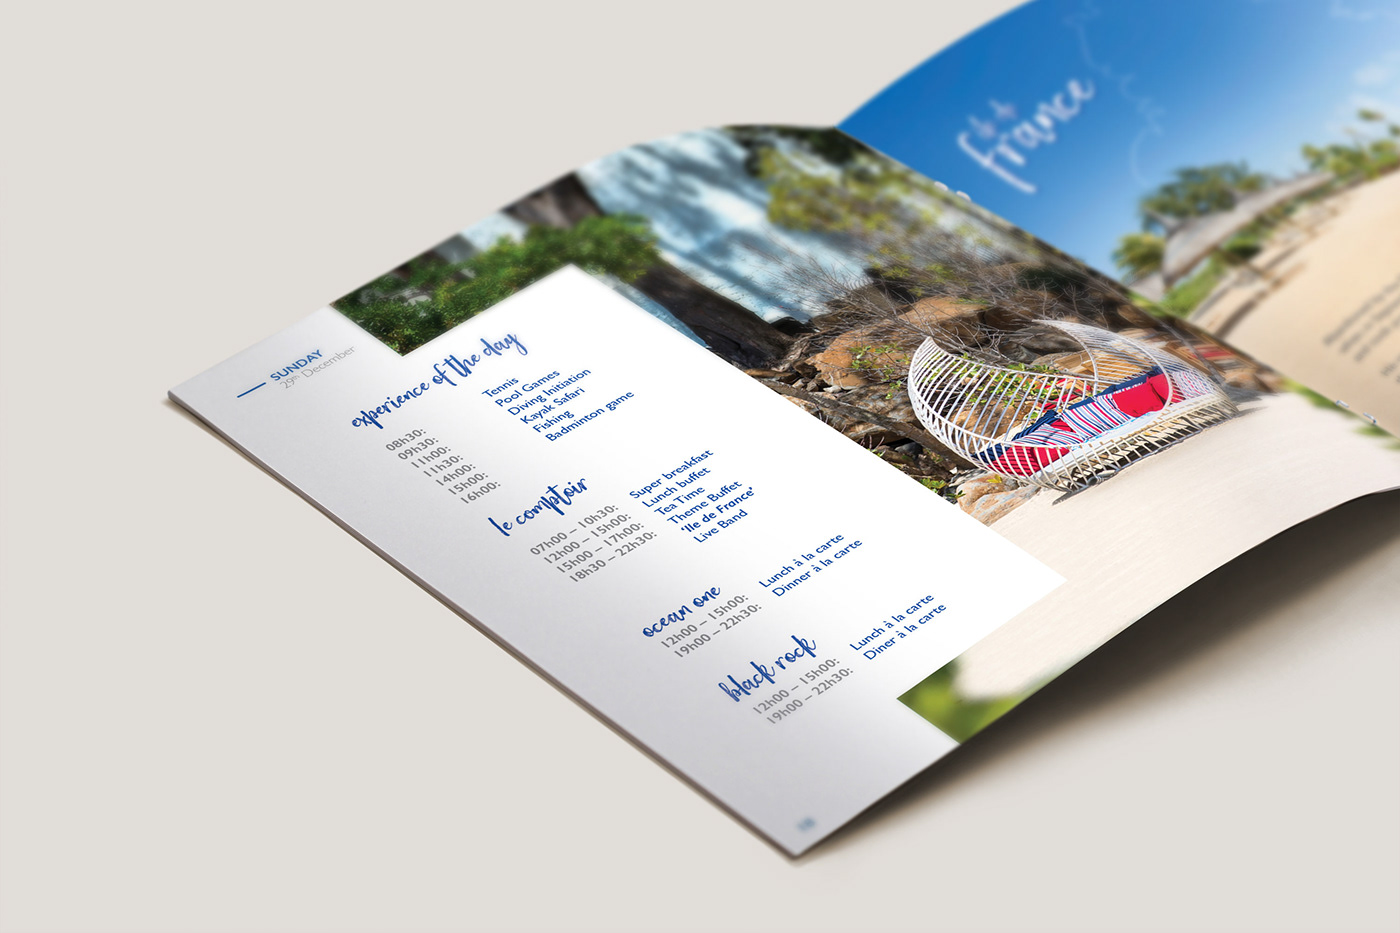 Hospitality hotel design Layout mauritius Tropical graphic design  editorial tourism